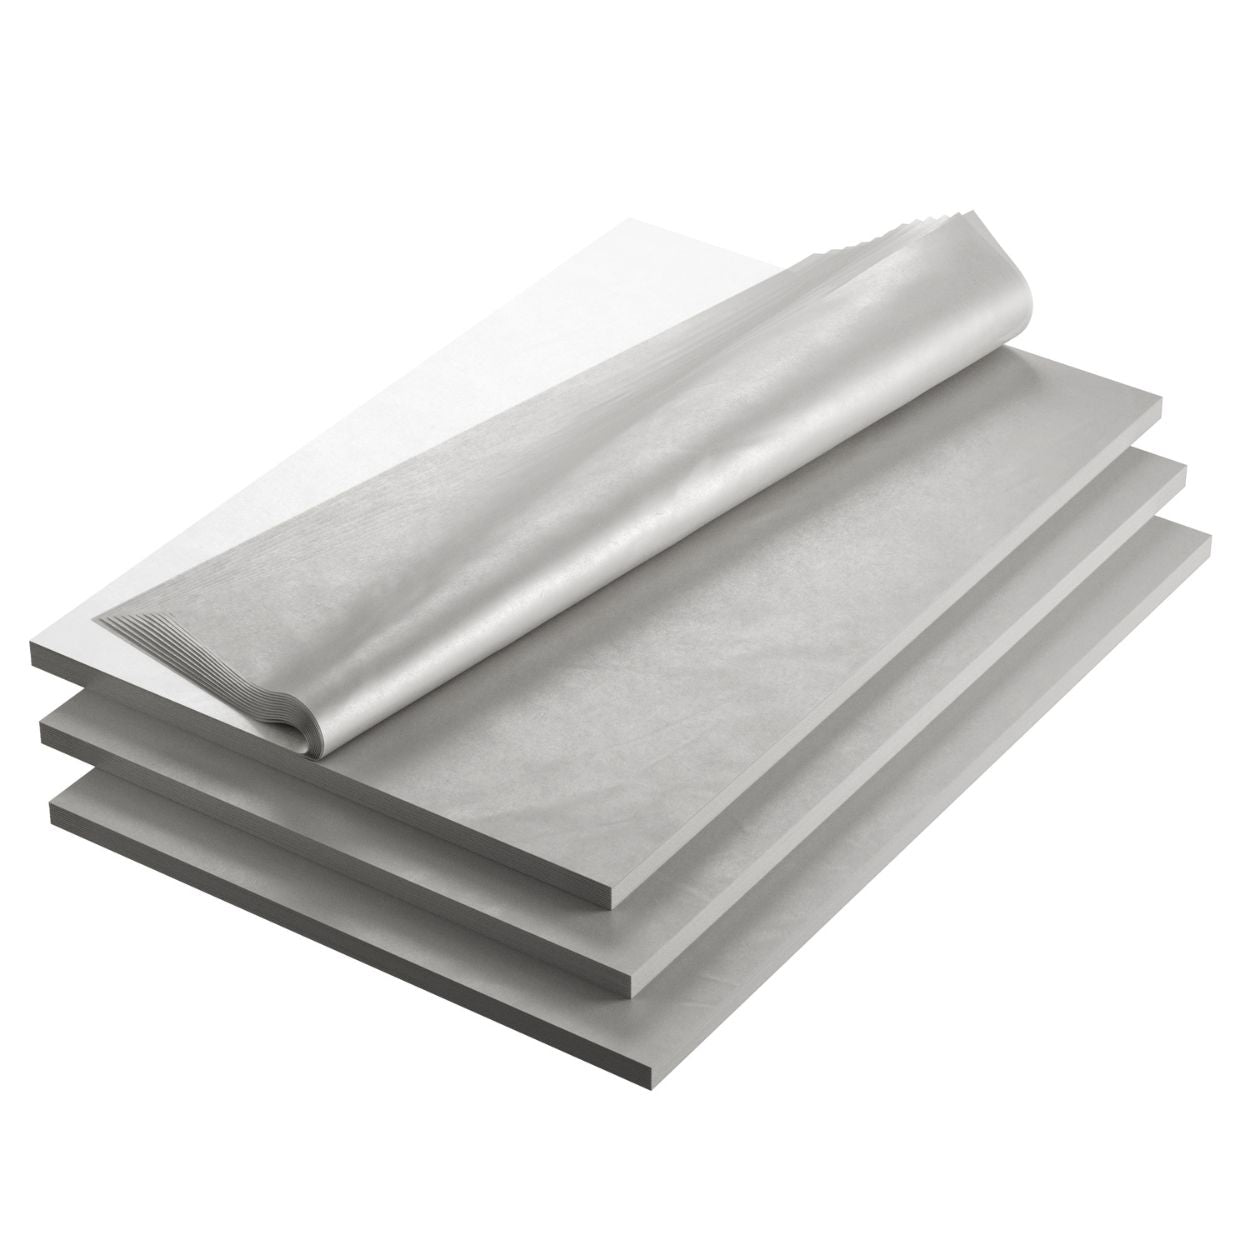 A1BakerySupplies Silver Metallic Tissue paper - One sided 20 In X